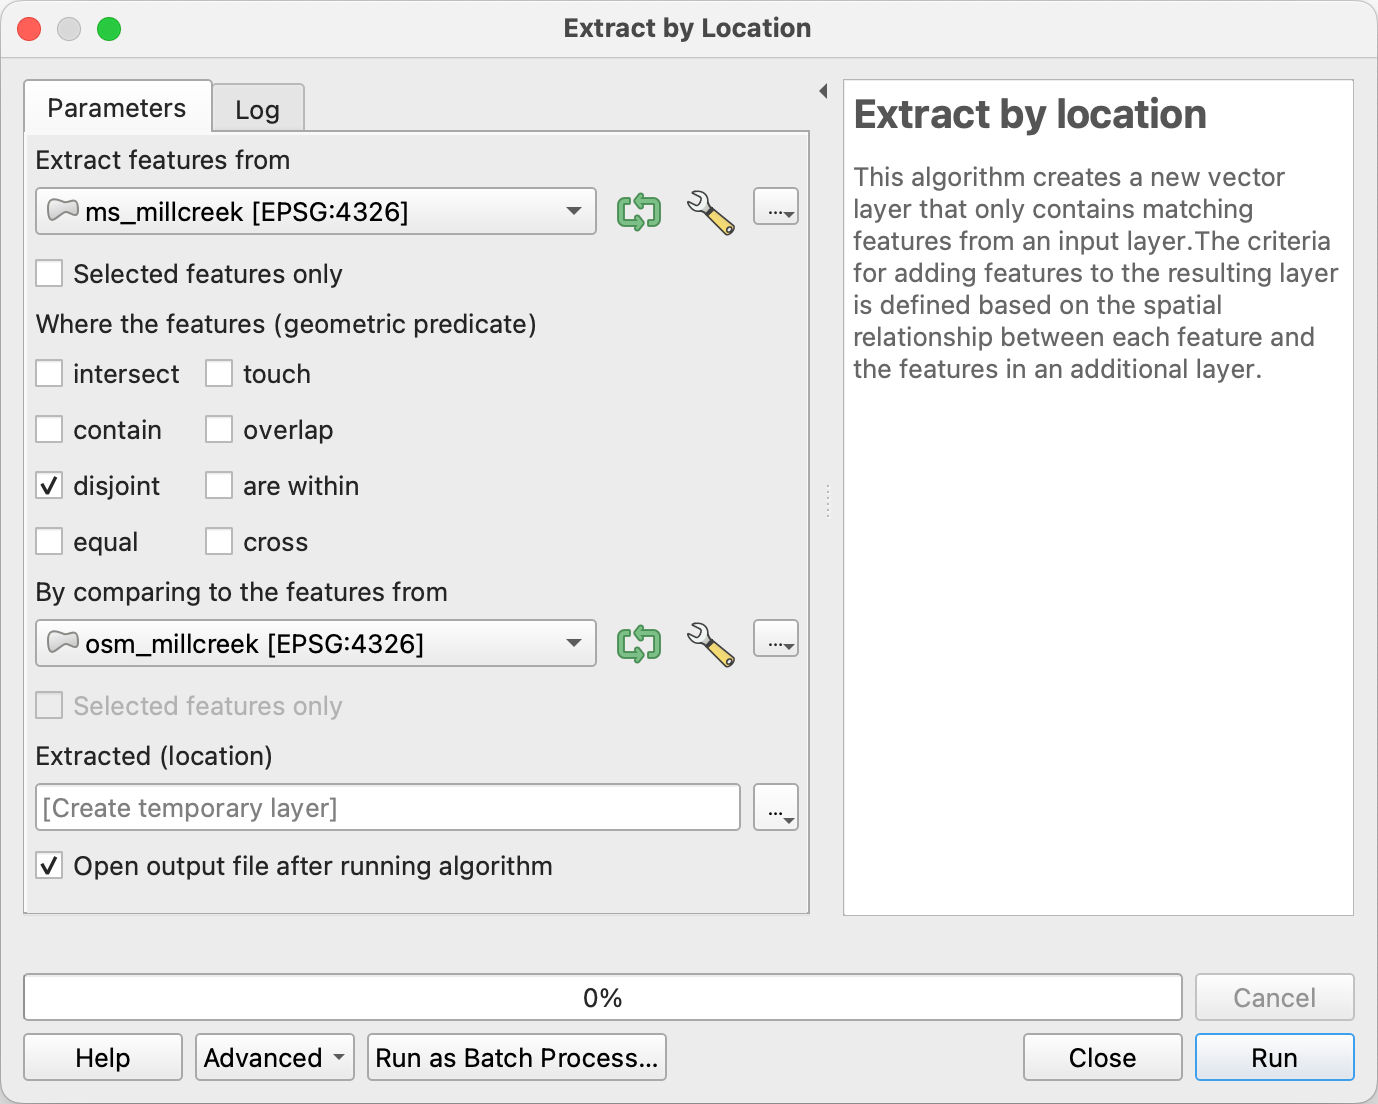 extact by location dialog in QGIS